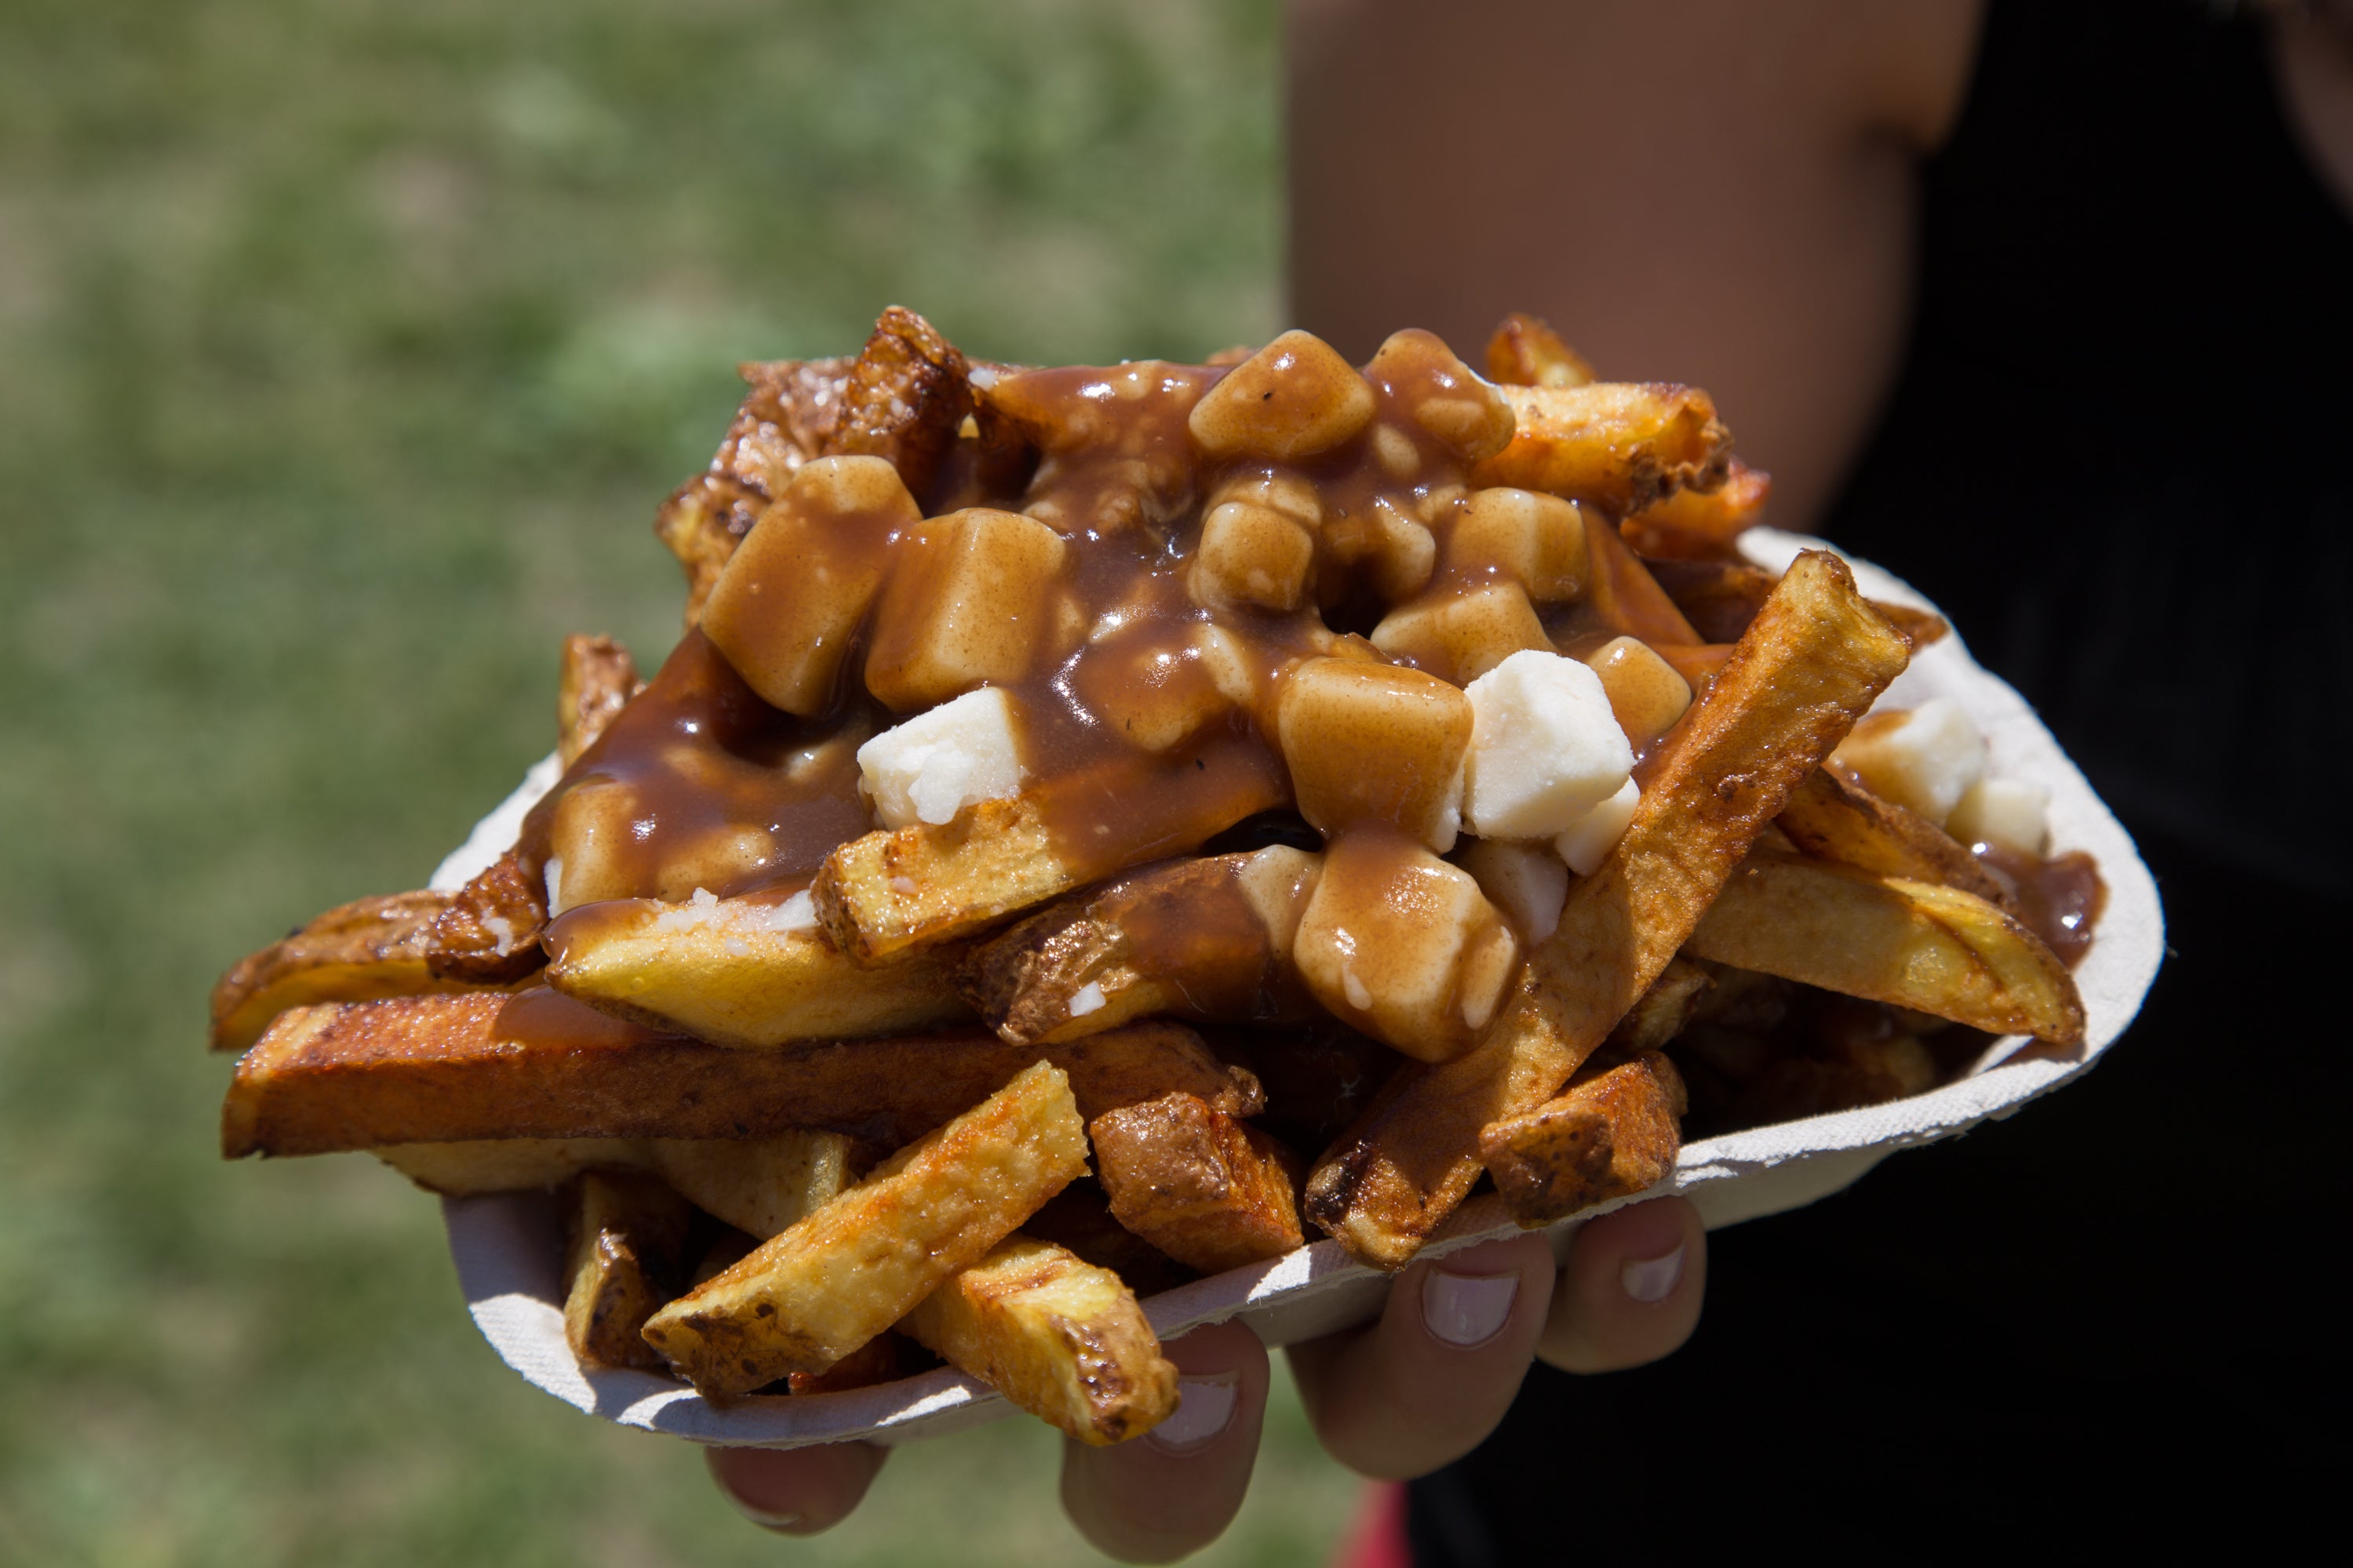 Poutine is a classic dish believed to have originated in Quebec